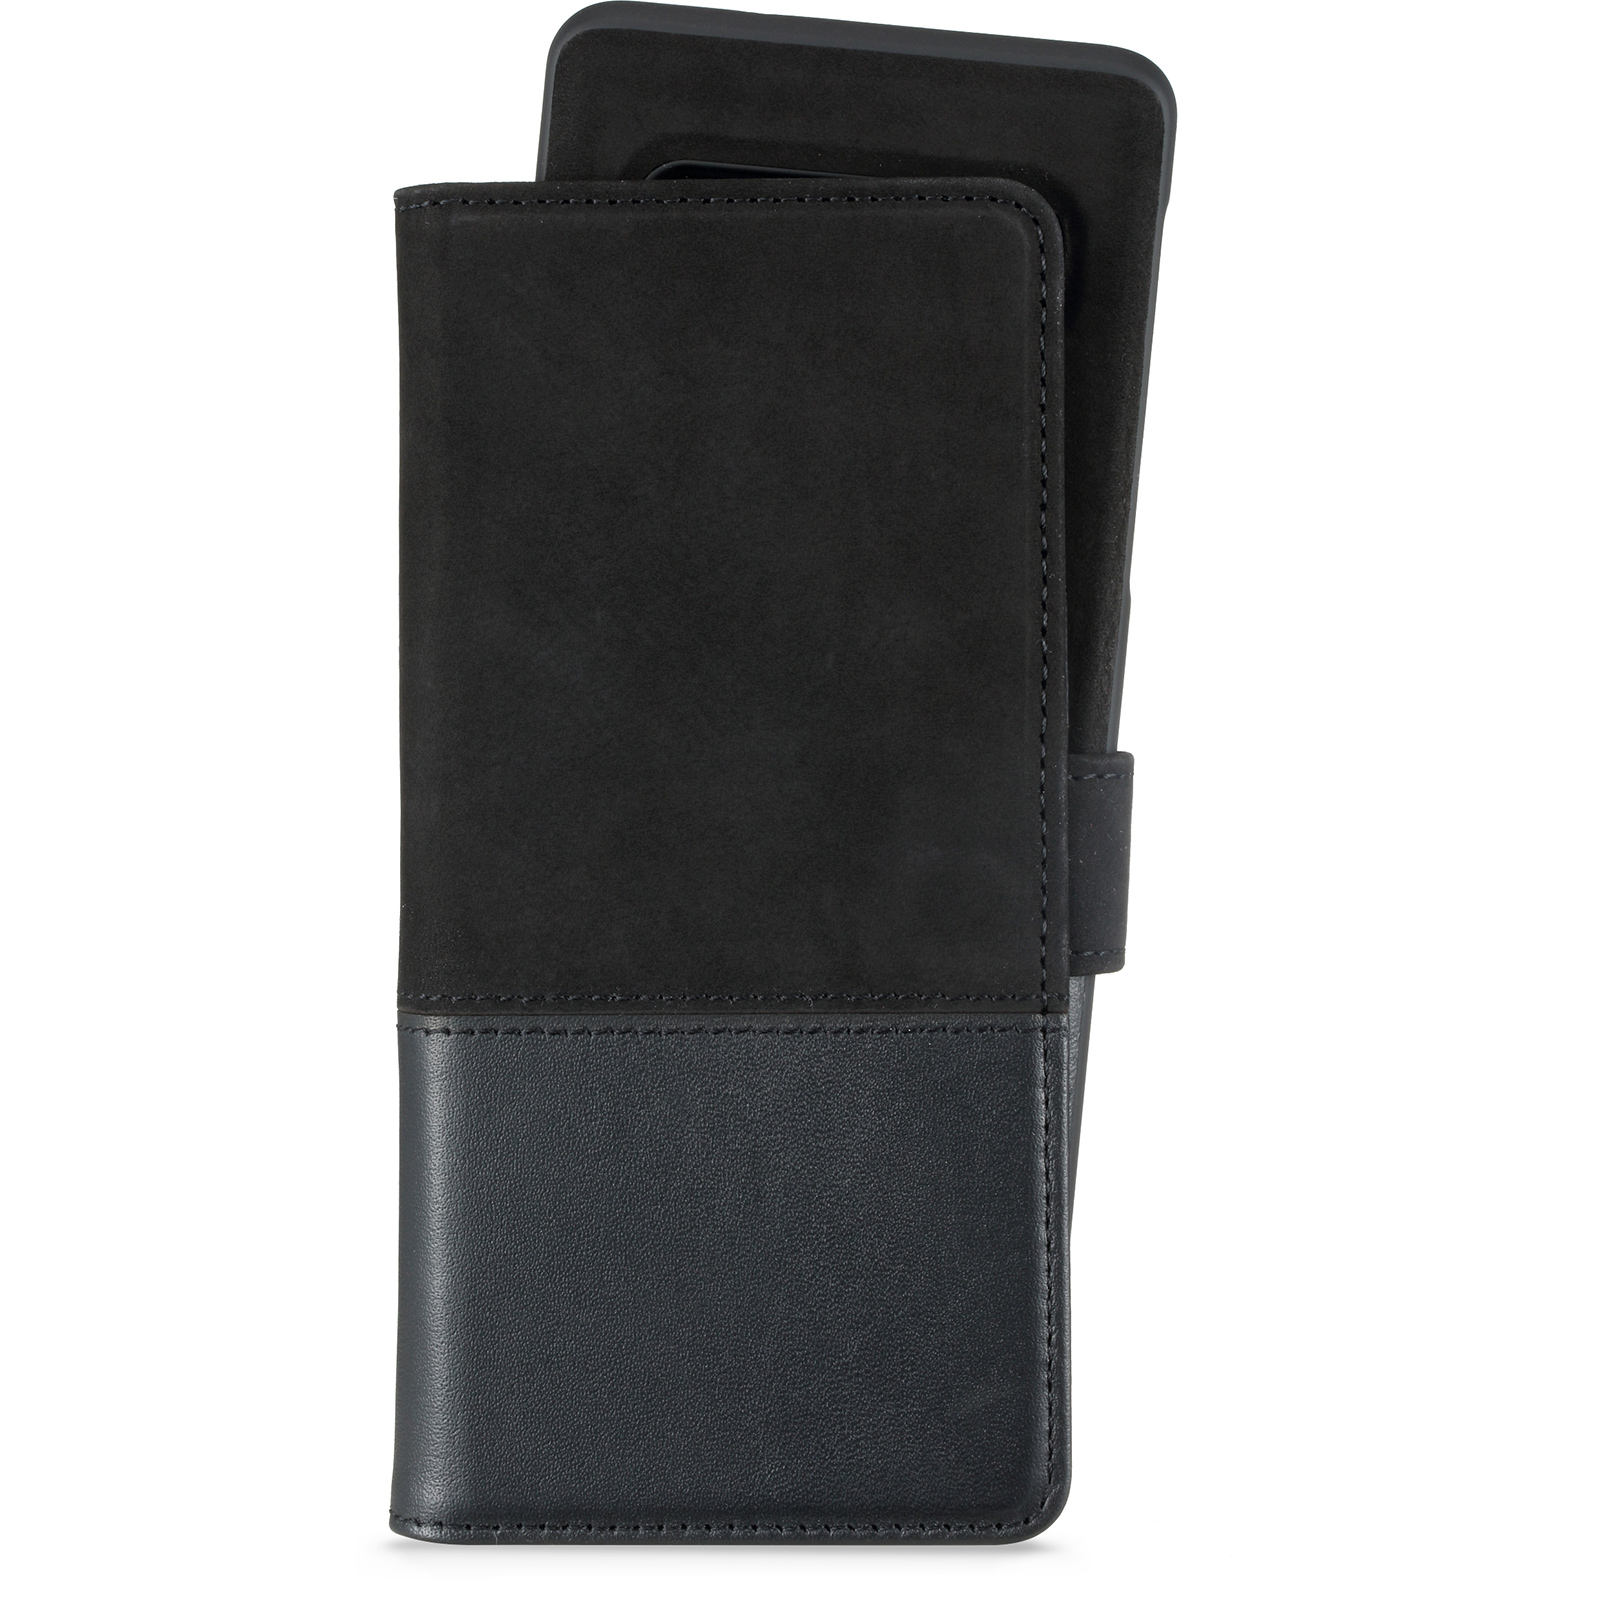 Samsung Galaxy S10, selected wallet case magnetic leather/suede, black